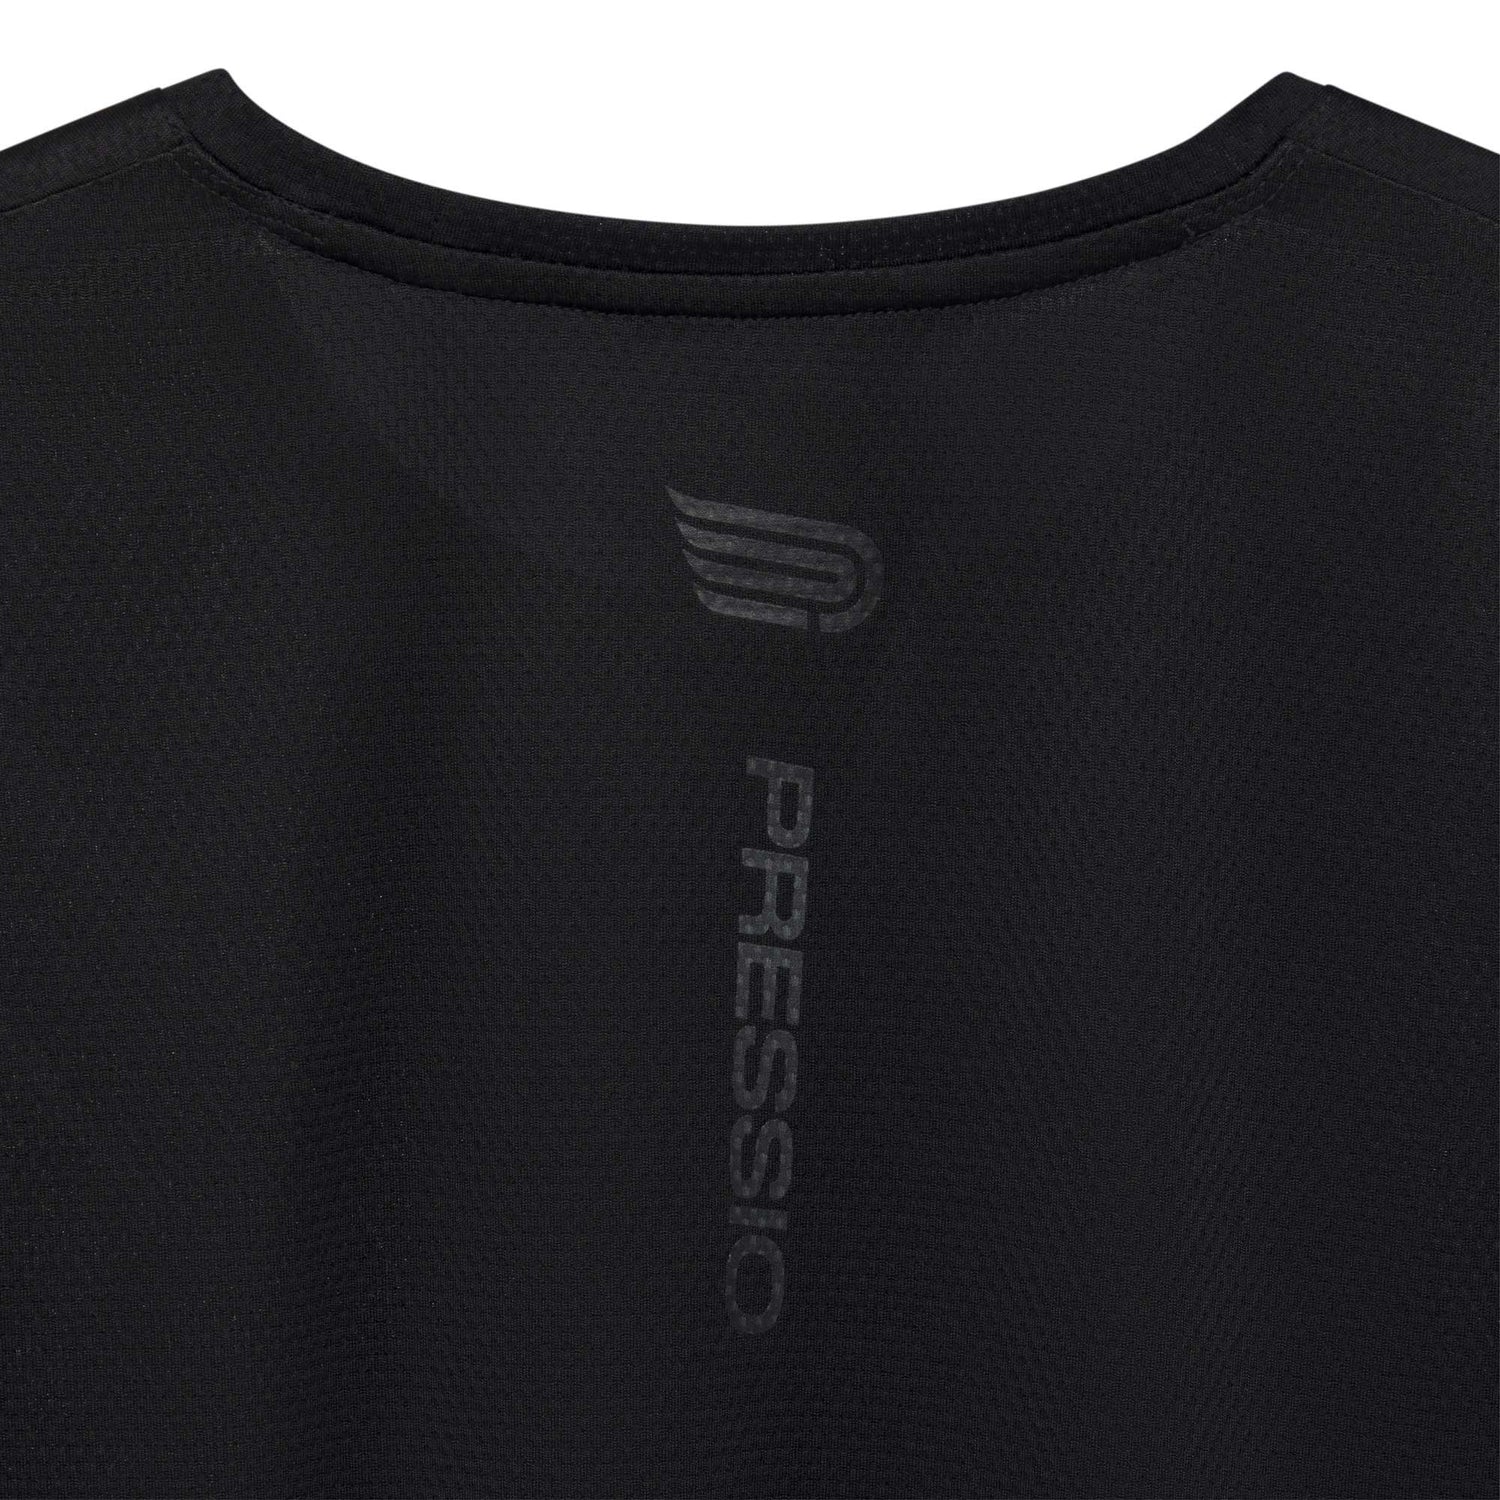 Pressio - M's Hāpai Long Sleeve Top - Recycled Polyester - Weekendbee - sustainable sportswear